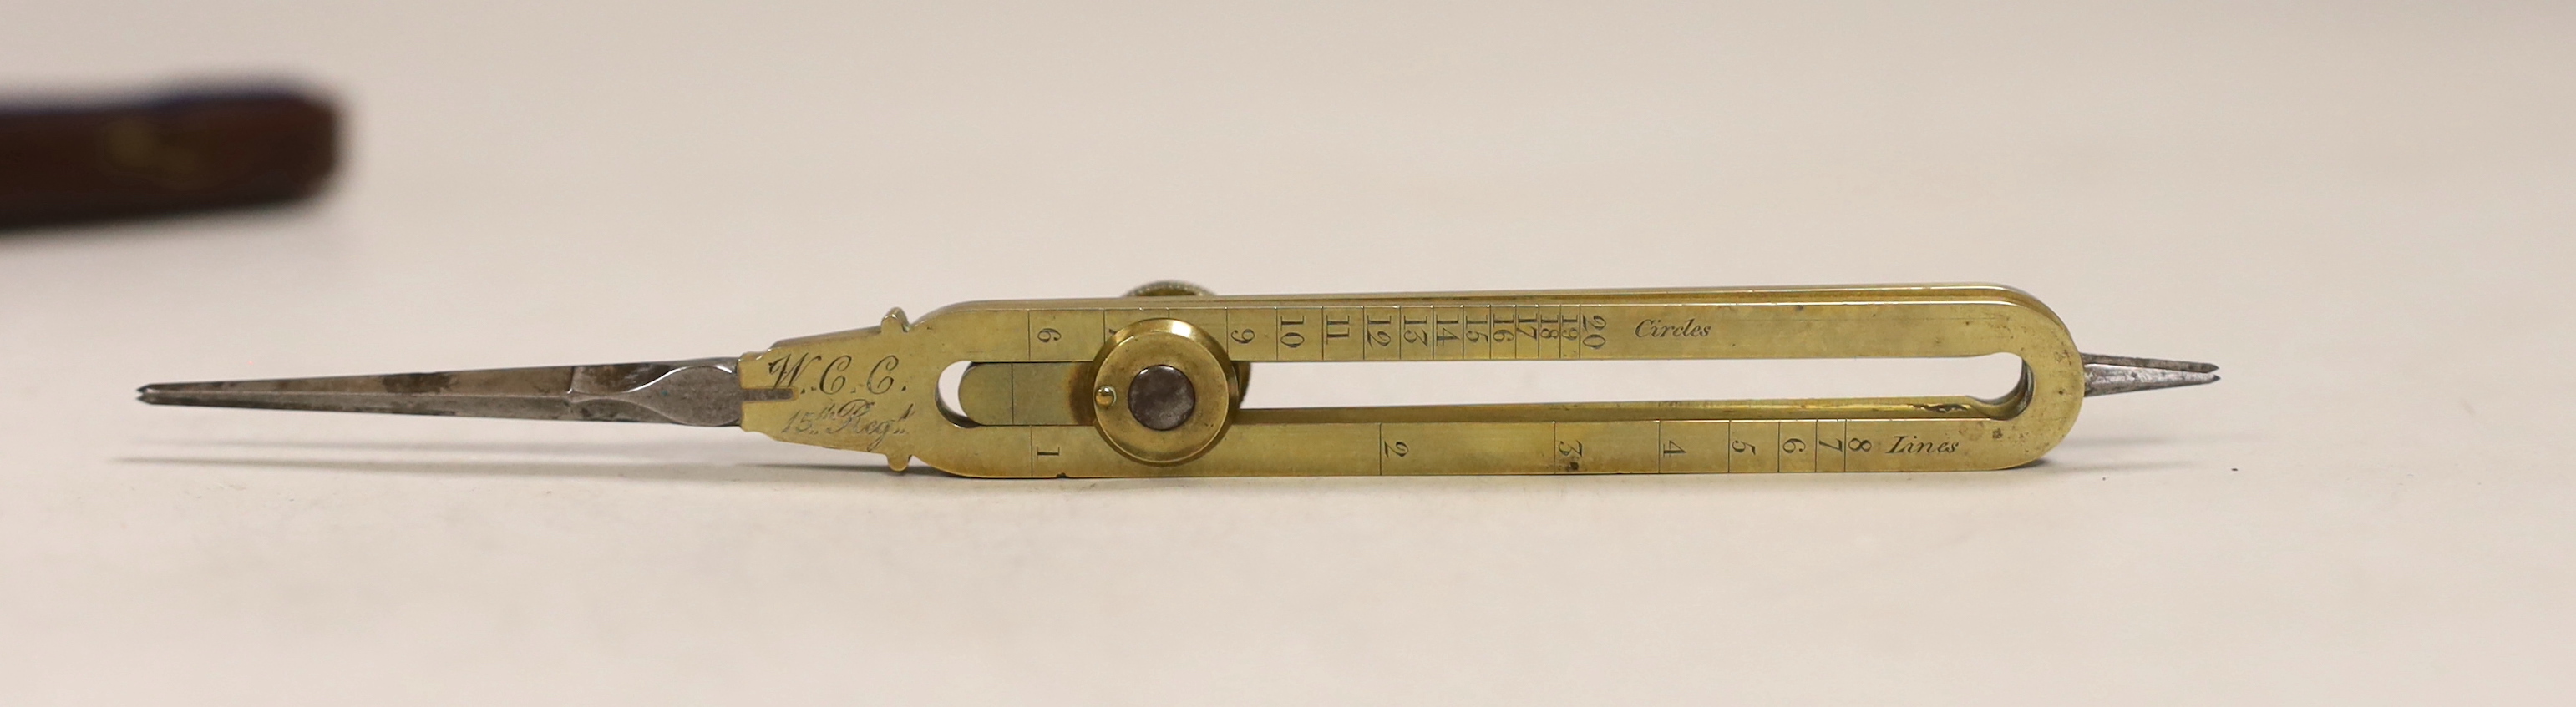 A 19th century brass and steel proportional compasses, Elliott Bros., 30 The Strand, engraved WCC, 15th Regt (East Yorks Regiment), in morocco case